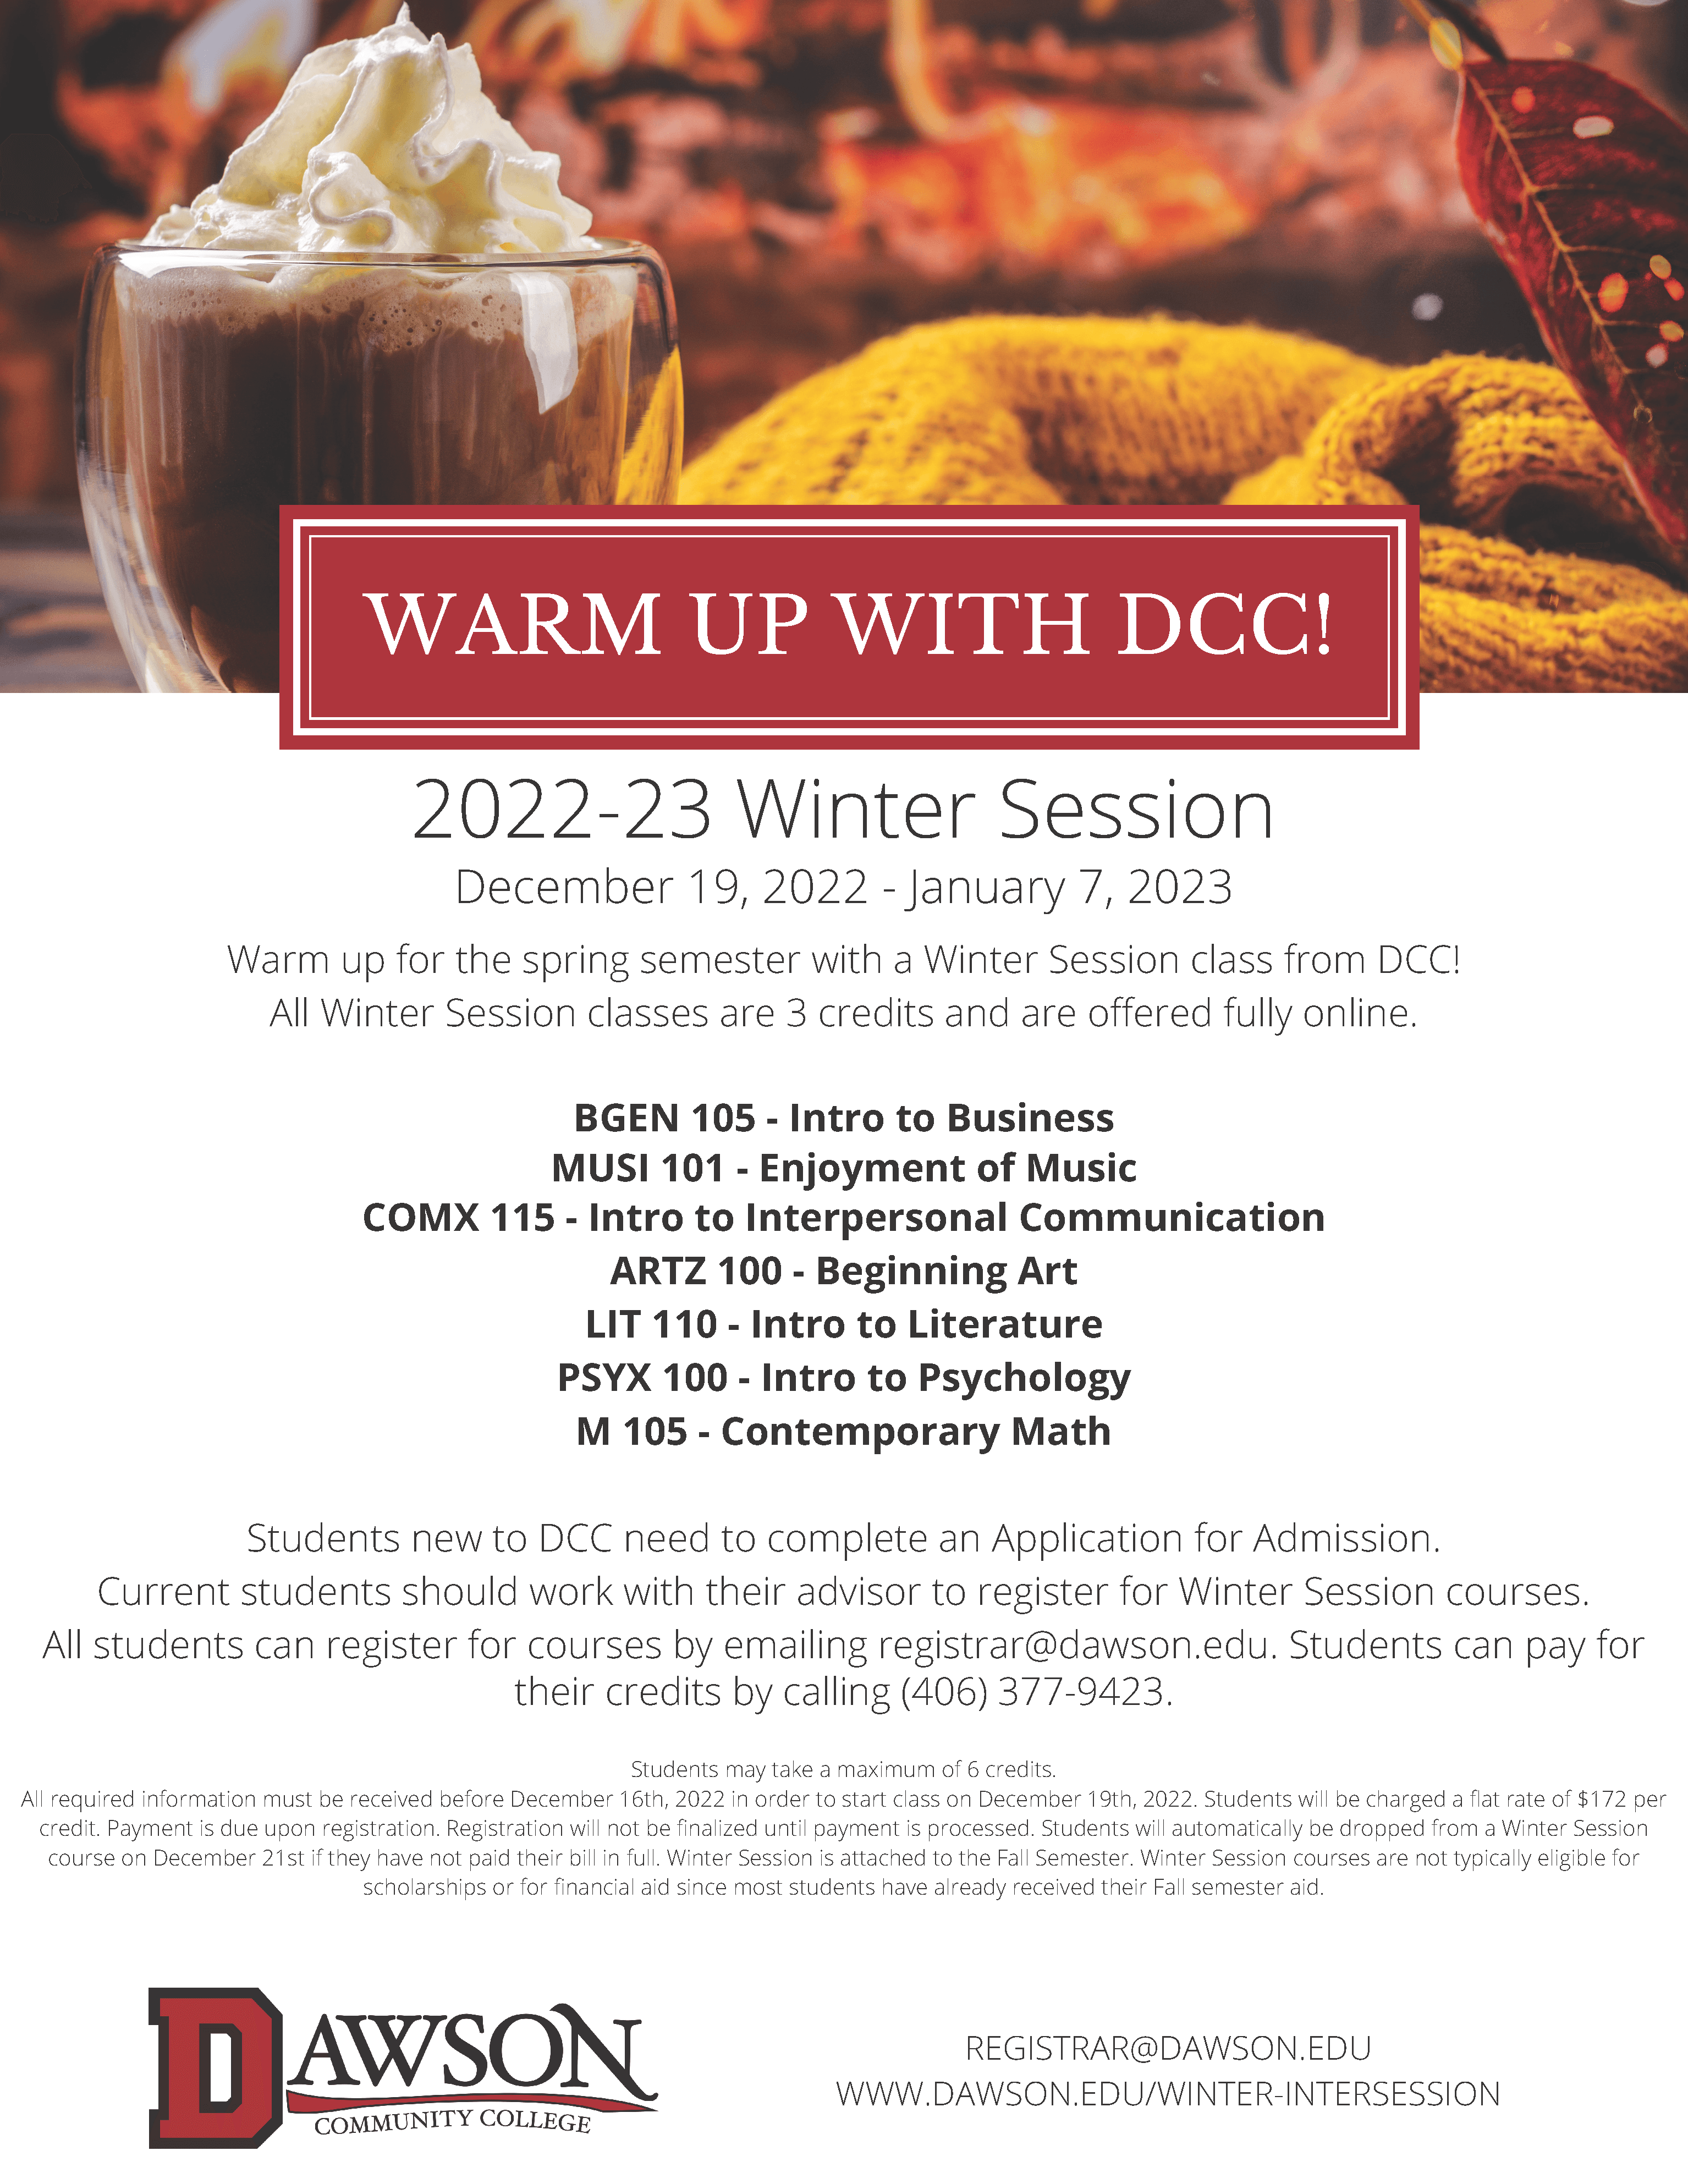 Learn about Winter Session at DCC! December 19 - January 7